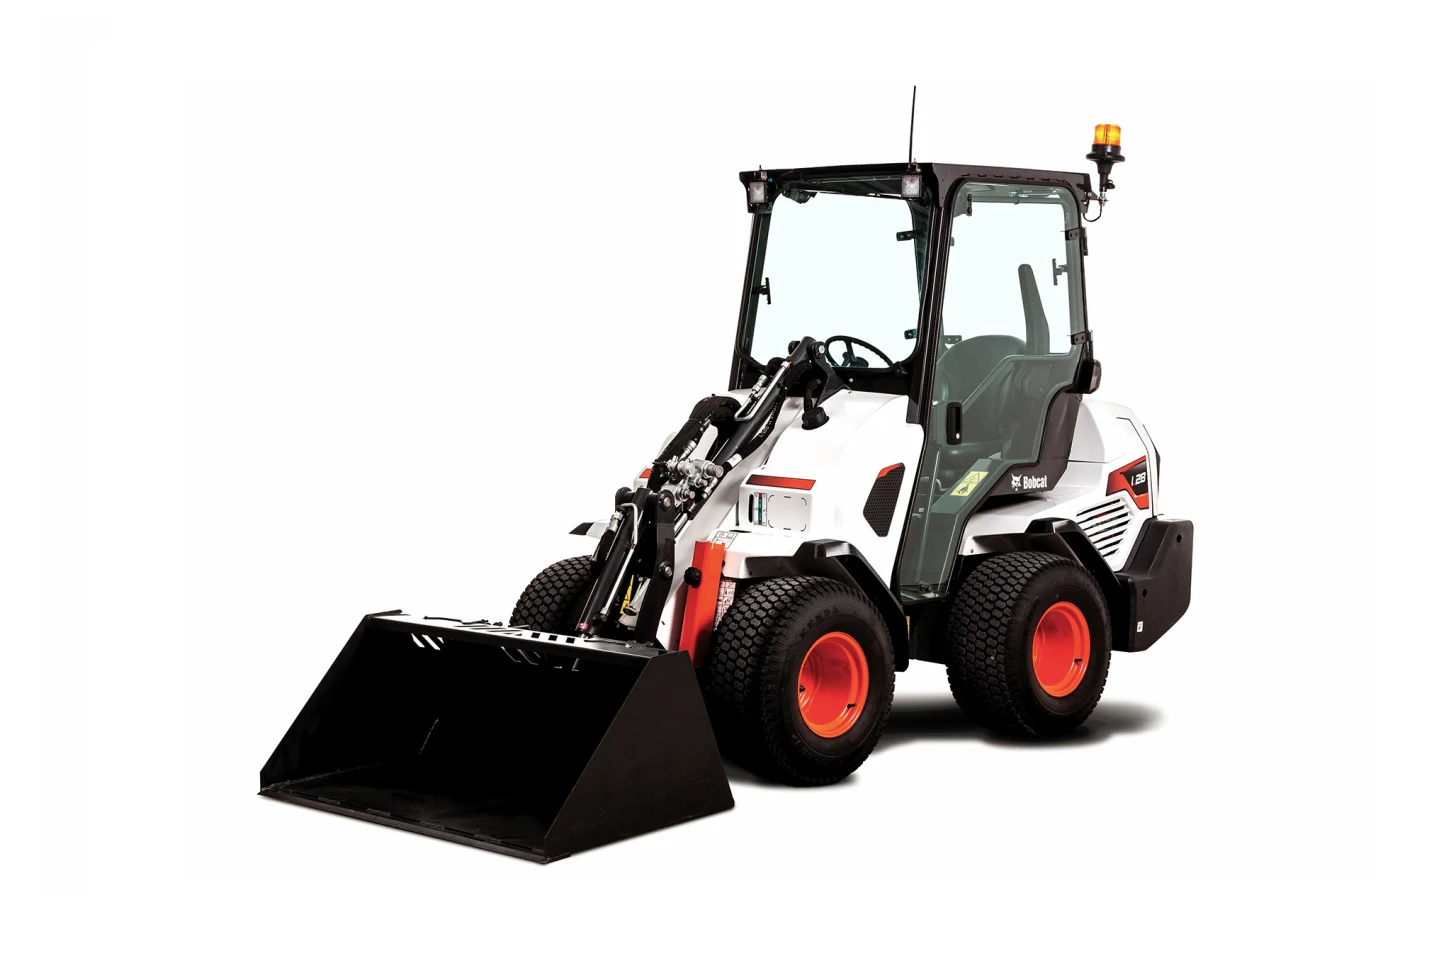 Browse Specs and more for the L28 Small Articulated Loader - Bobcat of the Rockies